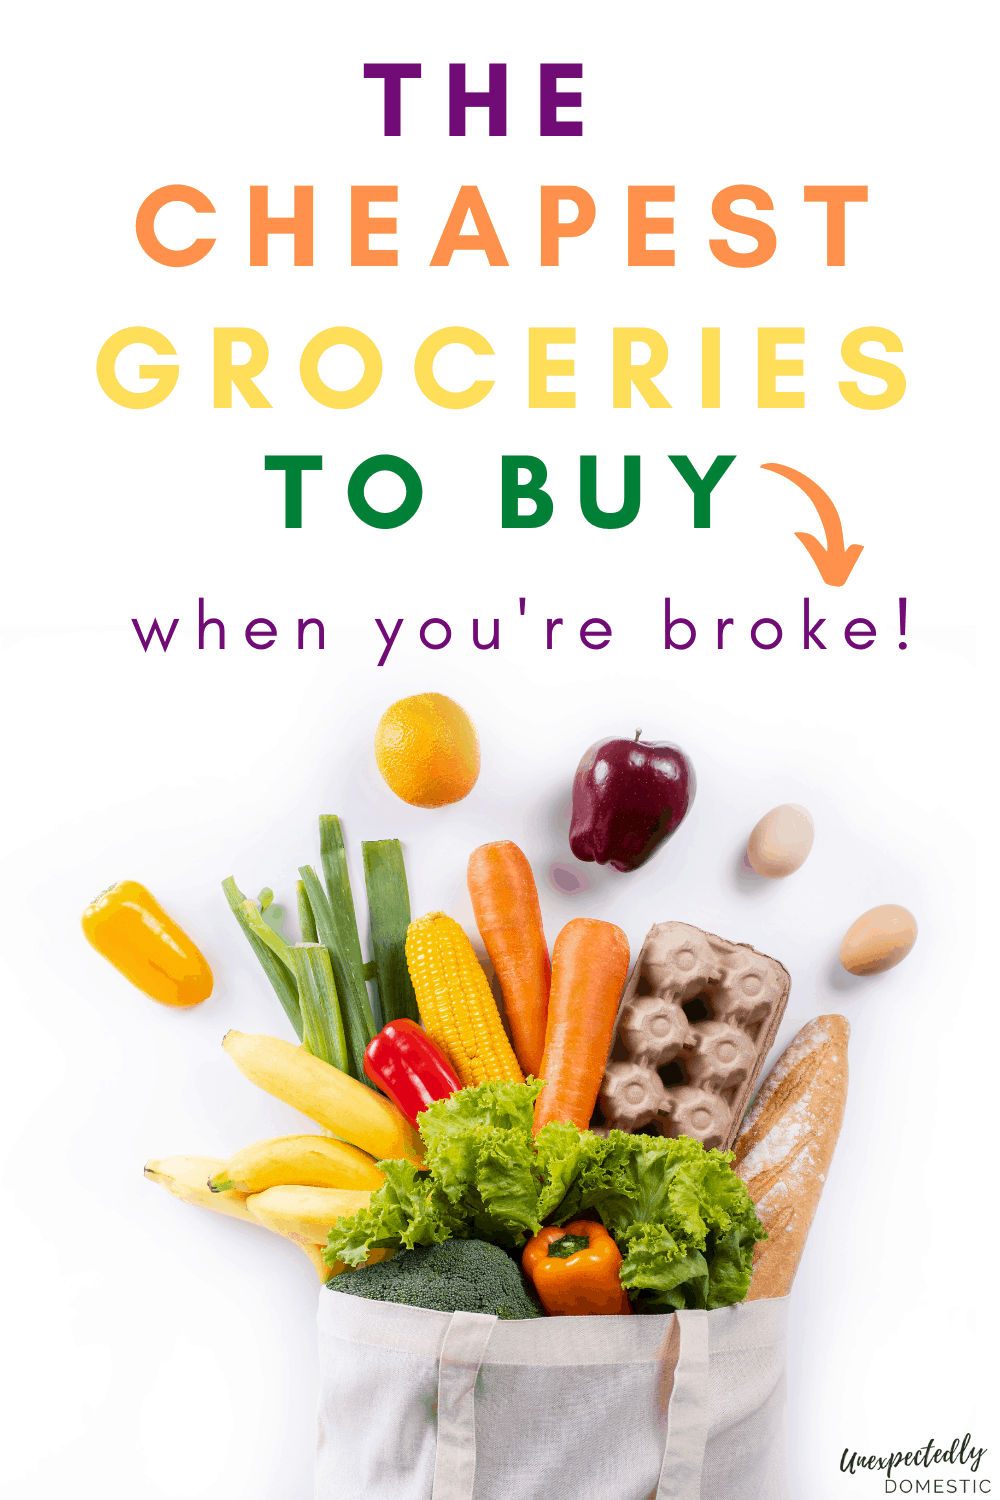 List of the cheapest groceries to buy when you're on a tight budget! This budget grocery list includes the most affordable foods at the supermarket so you can eat well and save money.